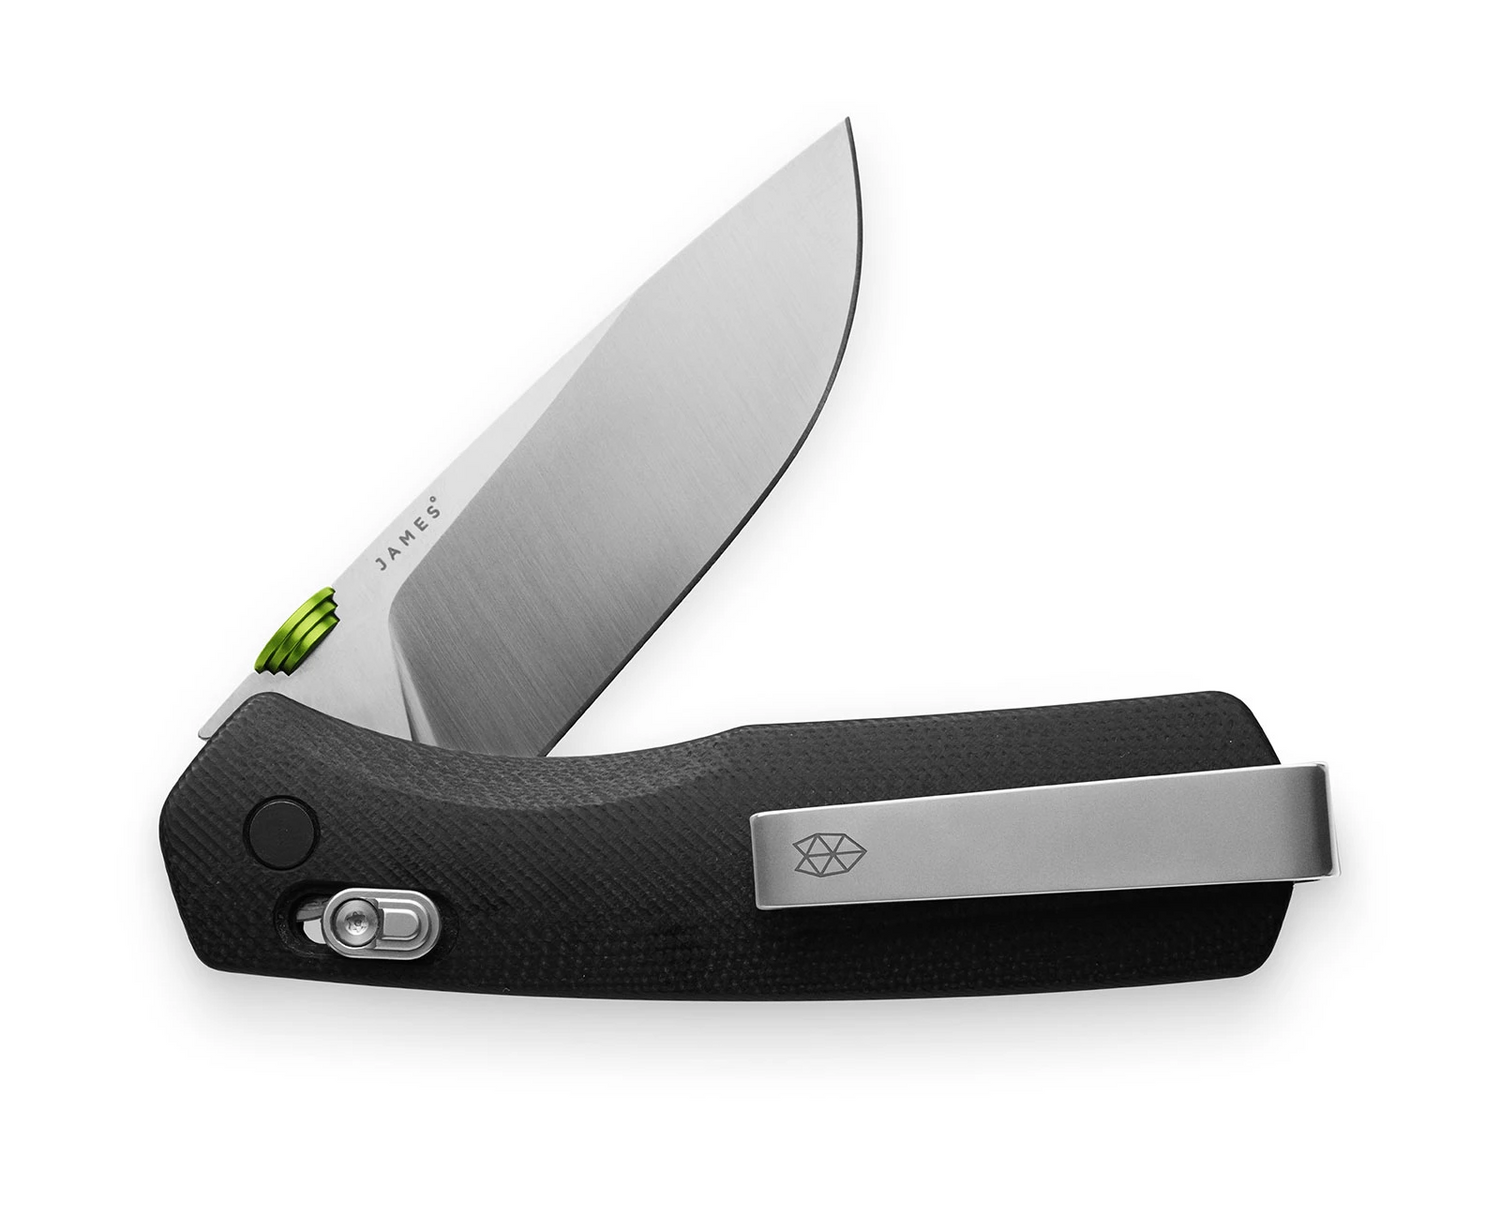 The Carter knife with corrosion-resistant VG-10 stainless steel blade.